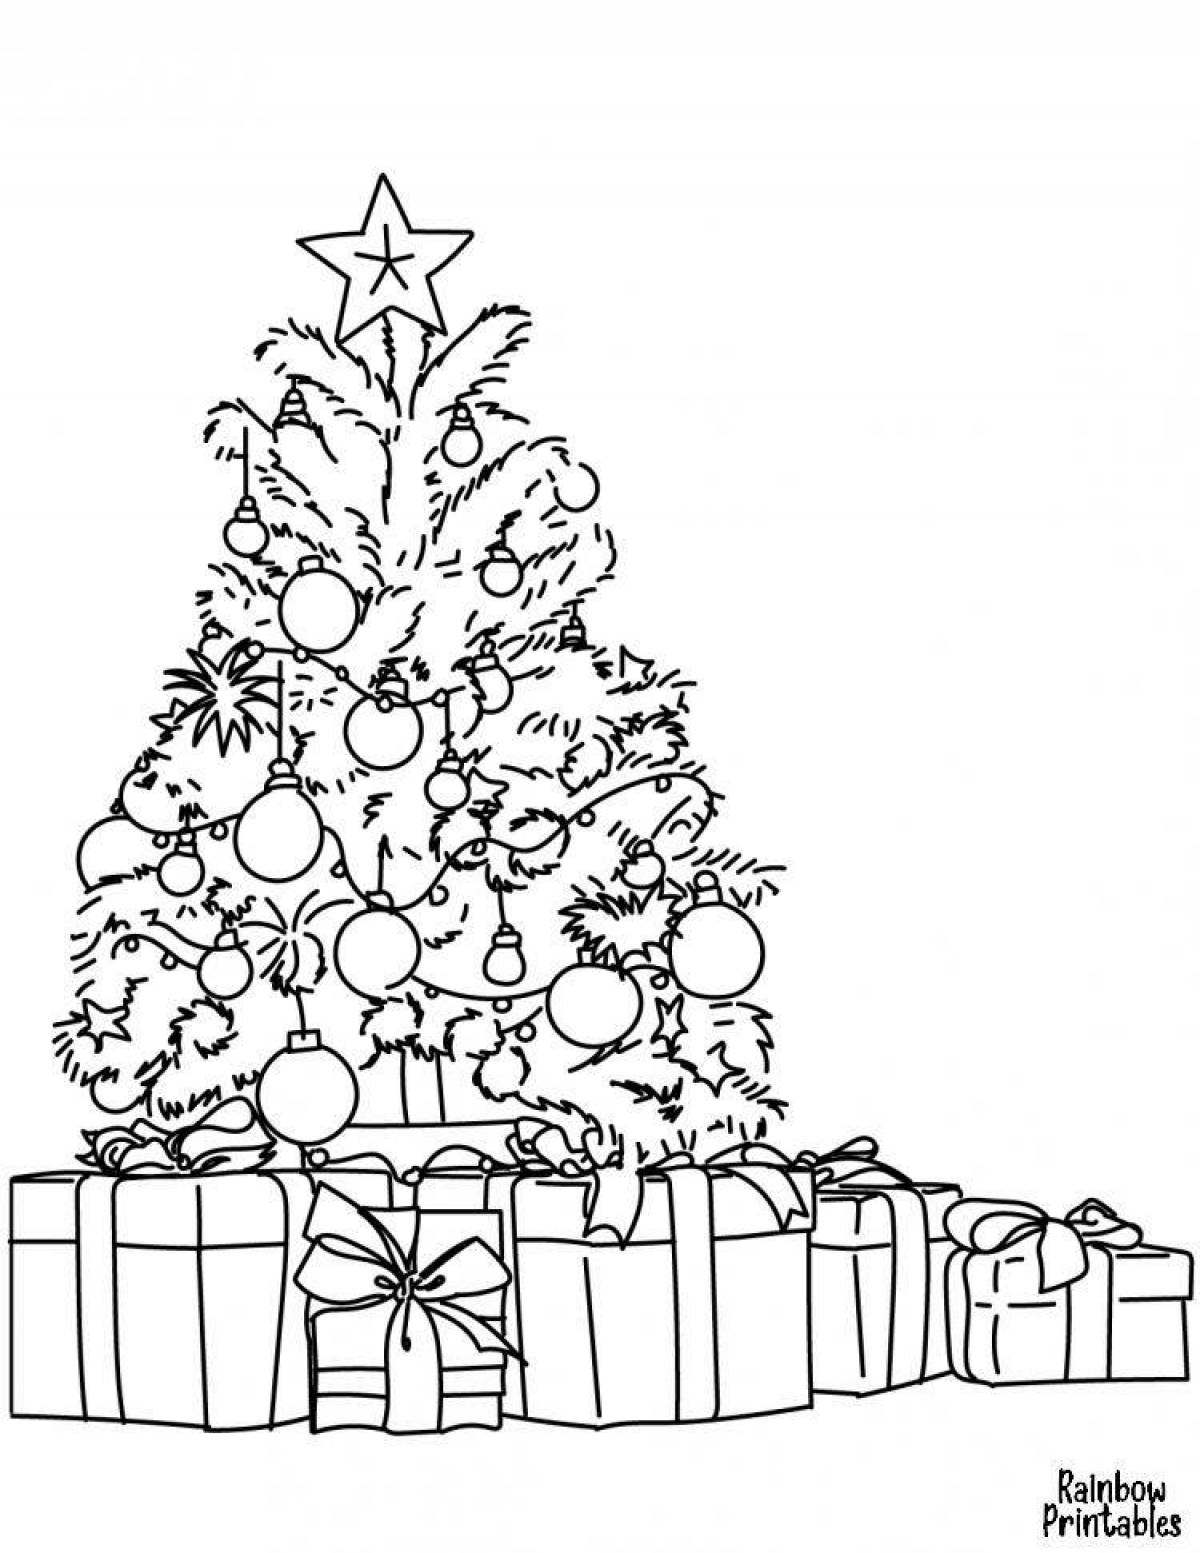 Flickering coloring tree with gifts